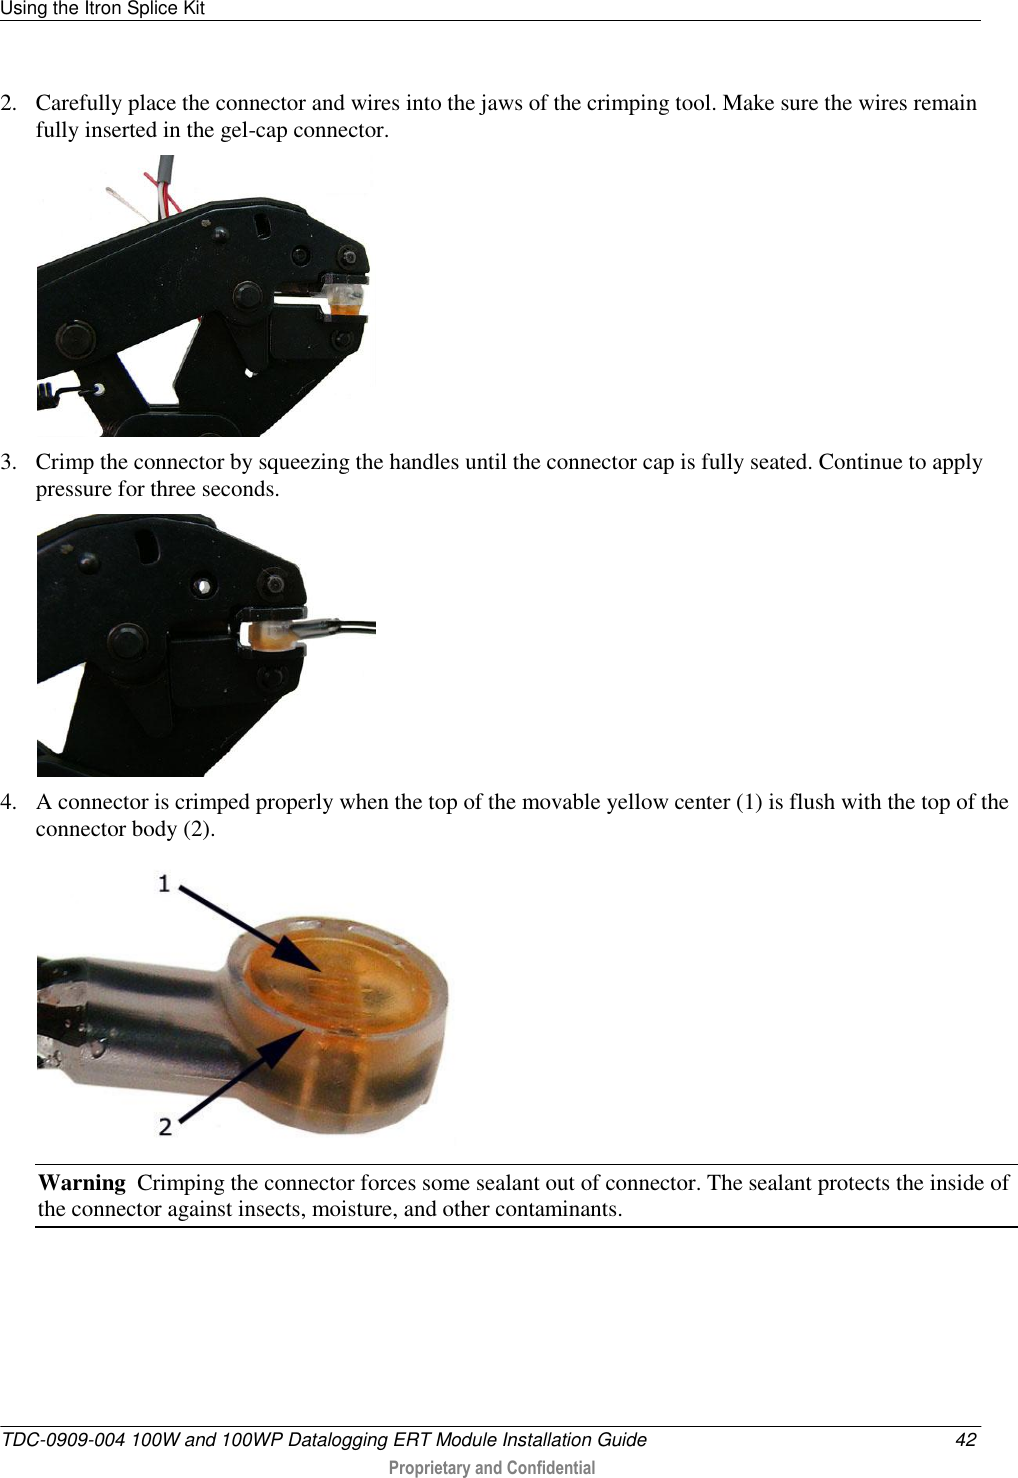 Using the Itron Splice Kit   TDC-0909-004 100W and 100WP Datalogging ERT Module Installation Guide  42  Proprietary and Confidential    2. Carefully place the connector and wires into the jaws of the crimping tool. Make sure the wires remain fully inserted in the gel-cap connector.  3. Crimp the connector by squeezing the handles until the connector cap is fully seated. Continue to apply pressure for three seconds.  4. A connector is crimped properly when the top of the movable yellow center (1) is flush with the top of the connector body (2).  Warning  Crimping the connector forces some sealant out of connector. The sealant protects the inside of the connector against insects, moisture, and other contaminants.   